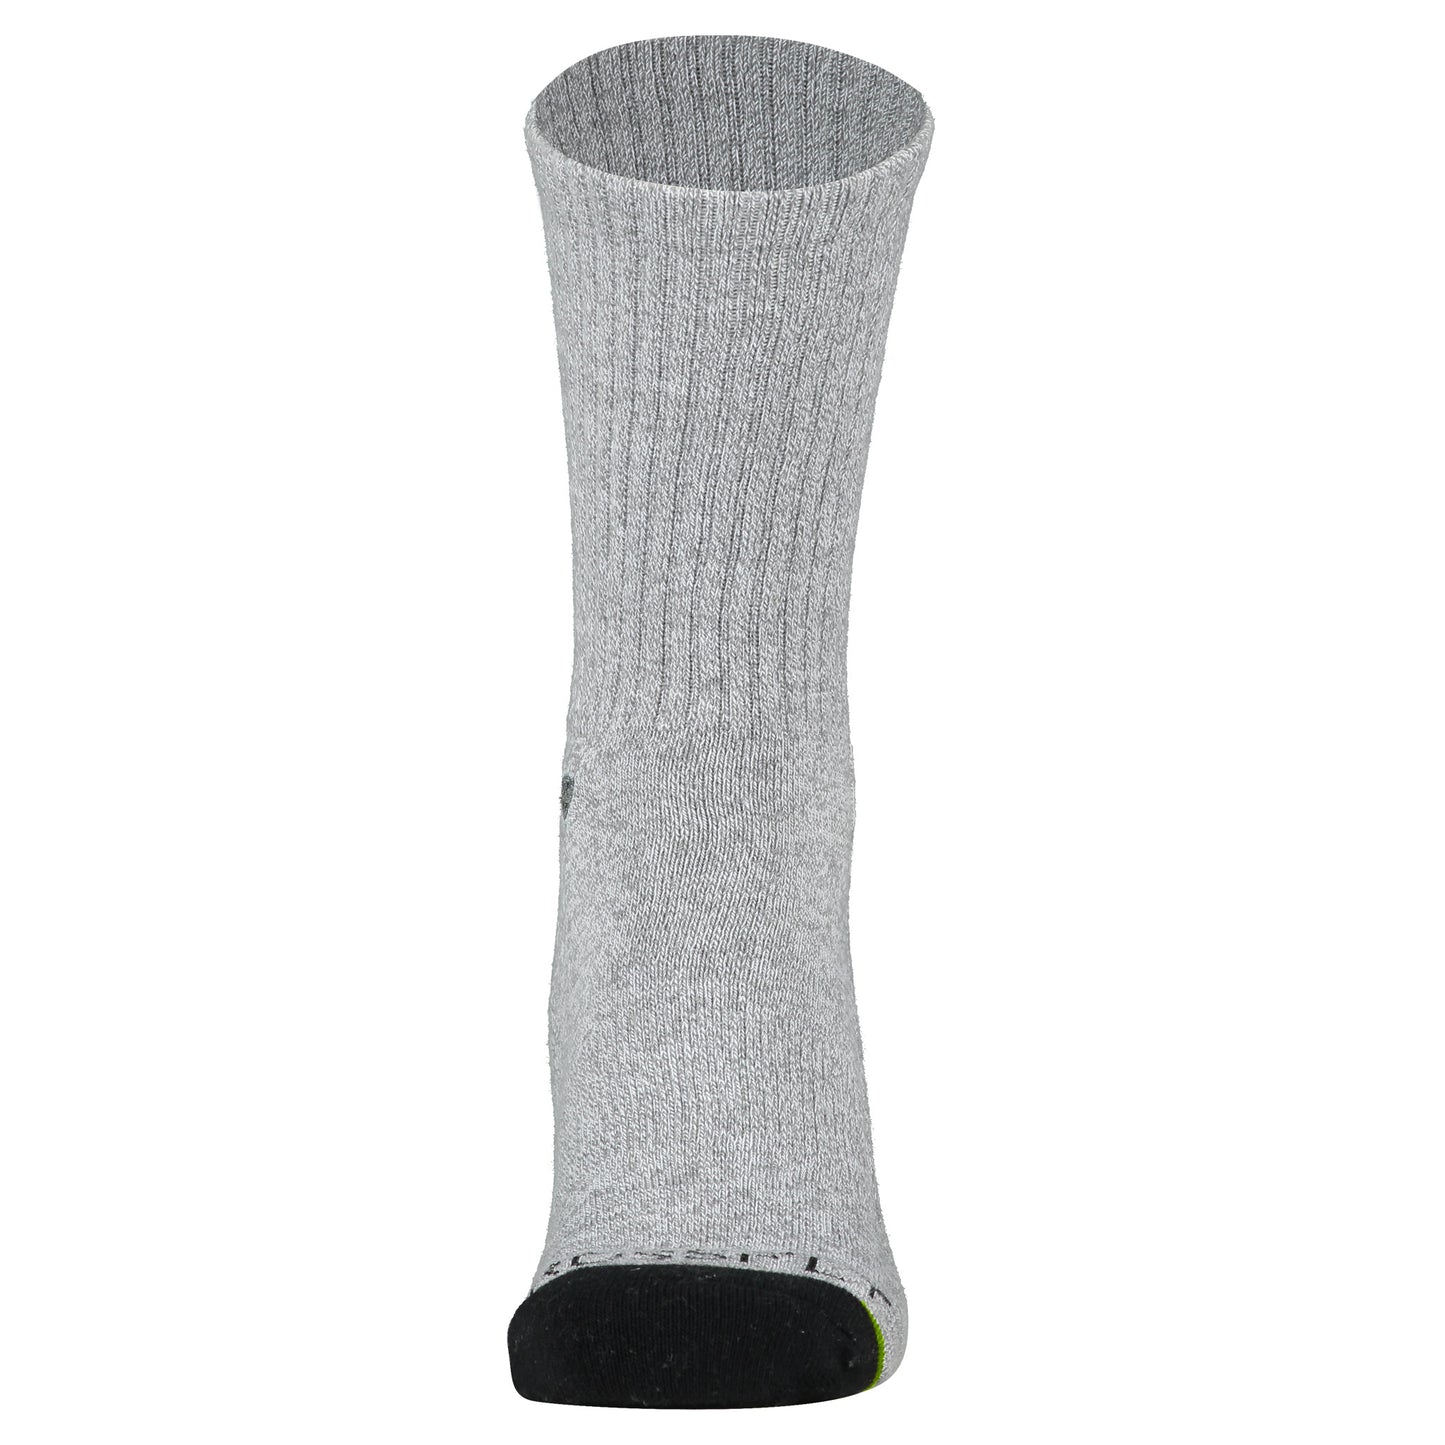 Crossfly men's Original Crew Socks in grey from the Everyday series, featuring Flat Toe Seams and 360 Hold.